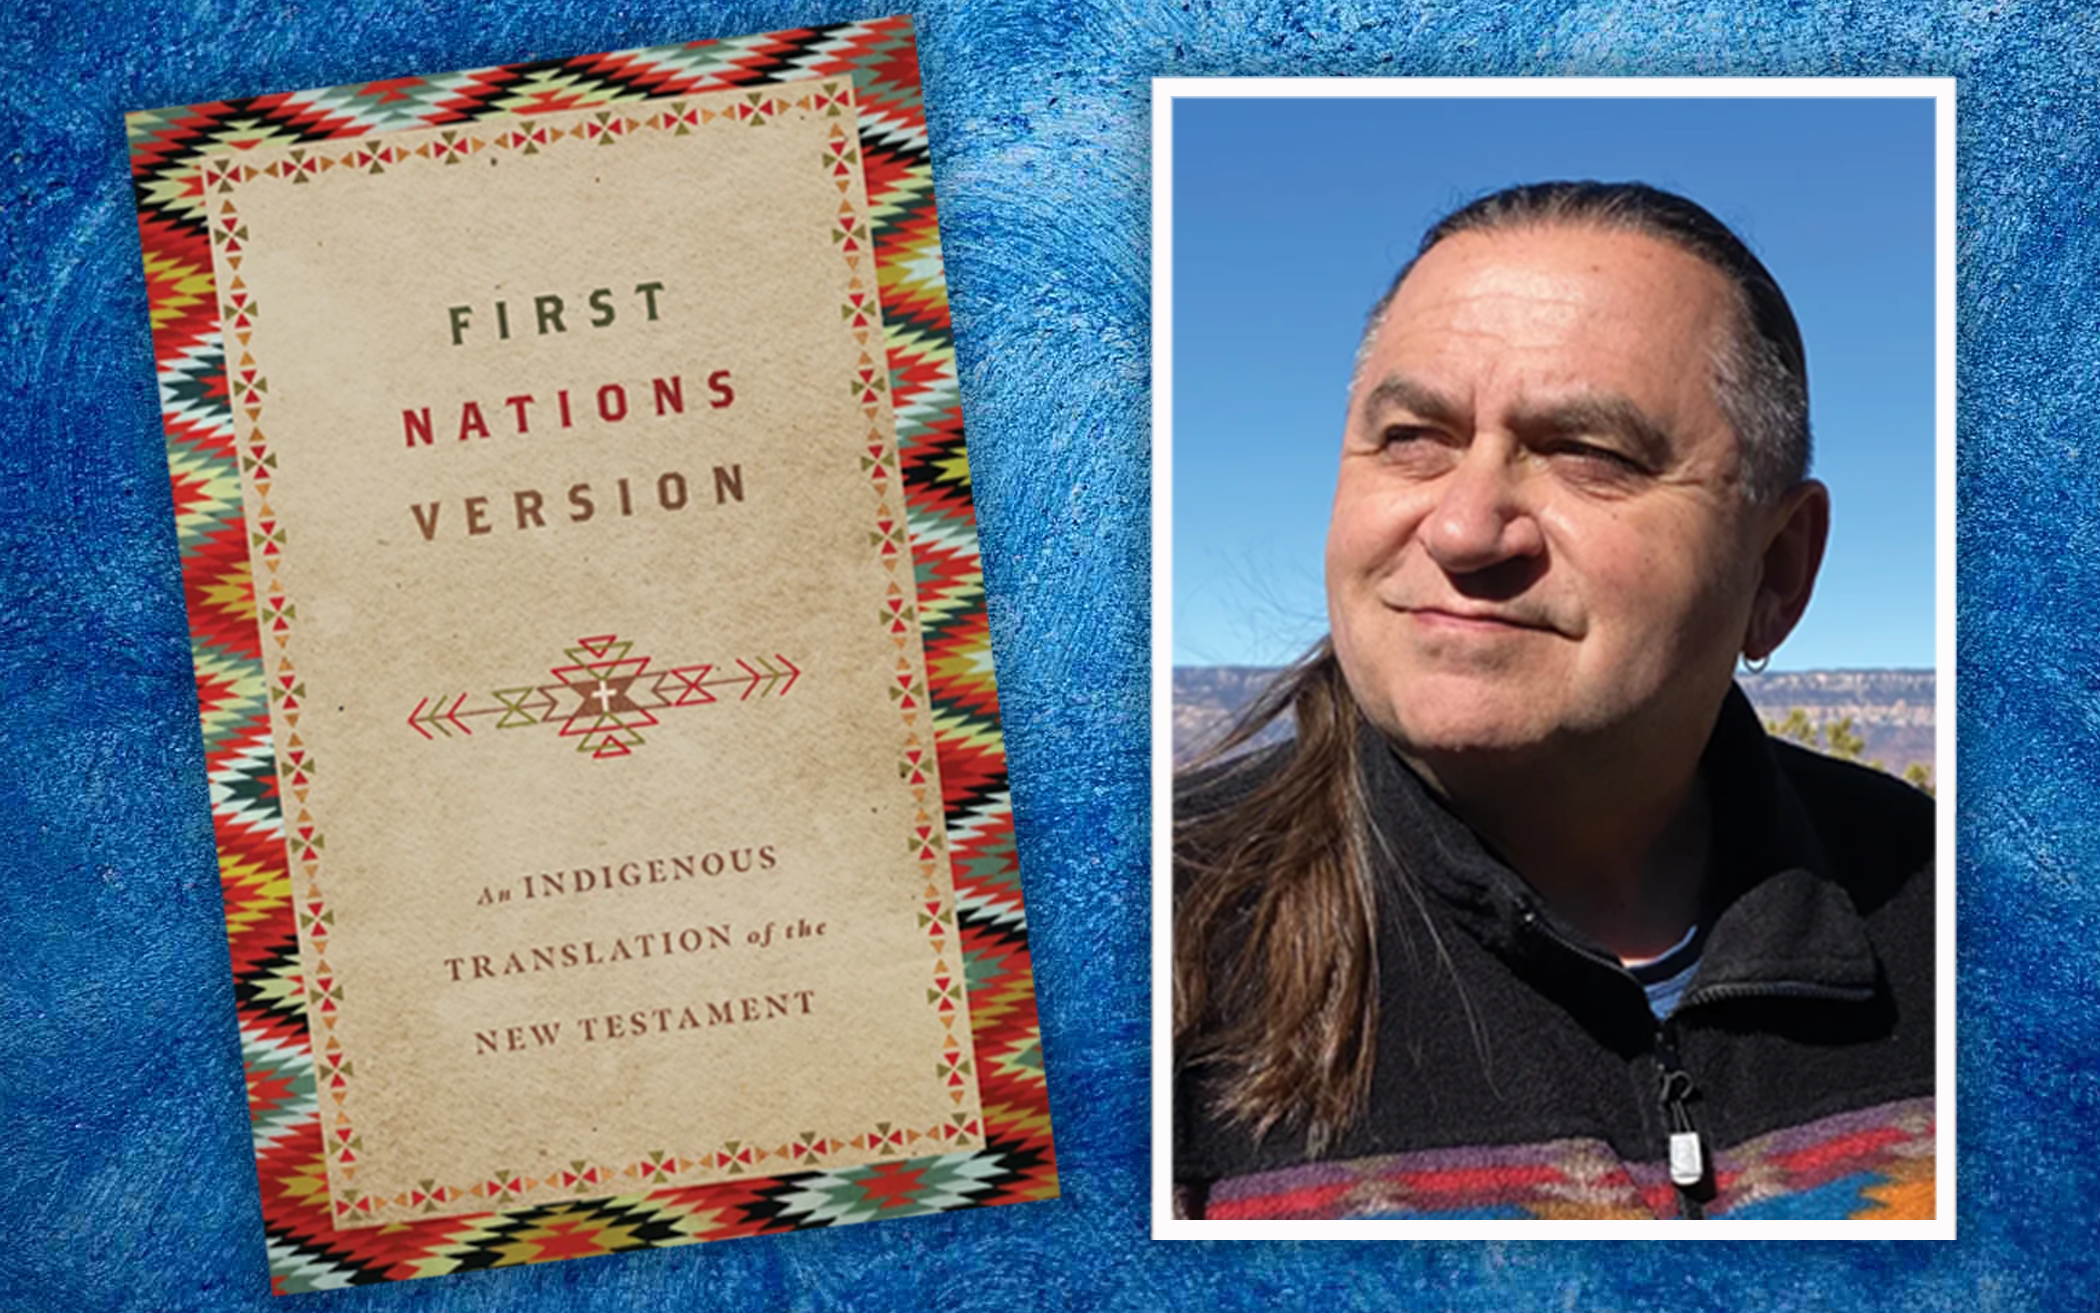 First Nations Version: An Indigenous Translation of the New Testament is a translation by Terry Wildman.